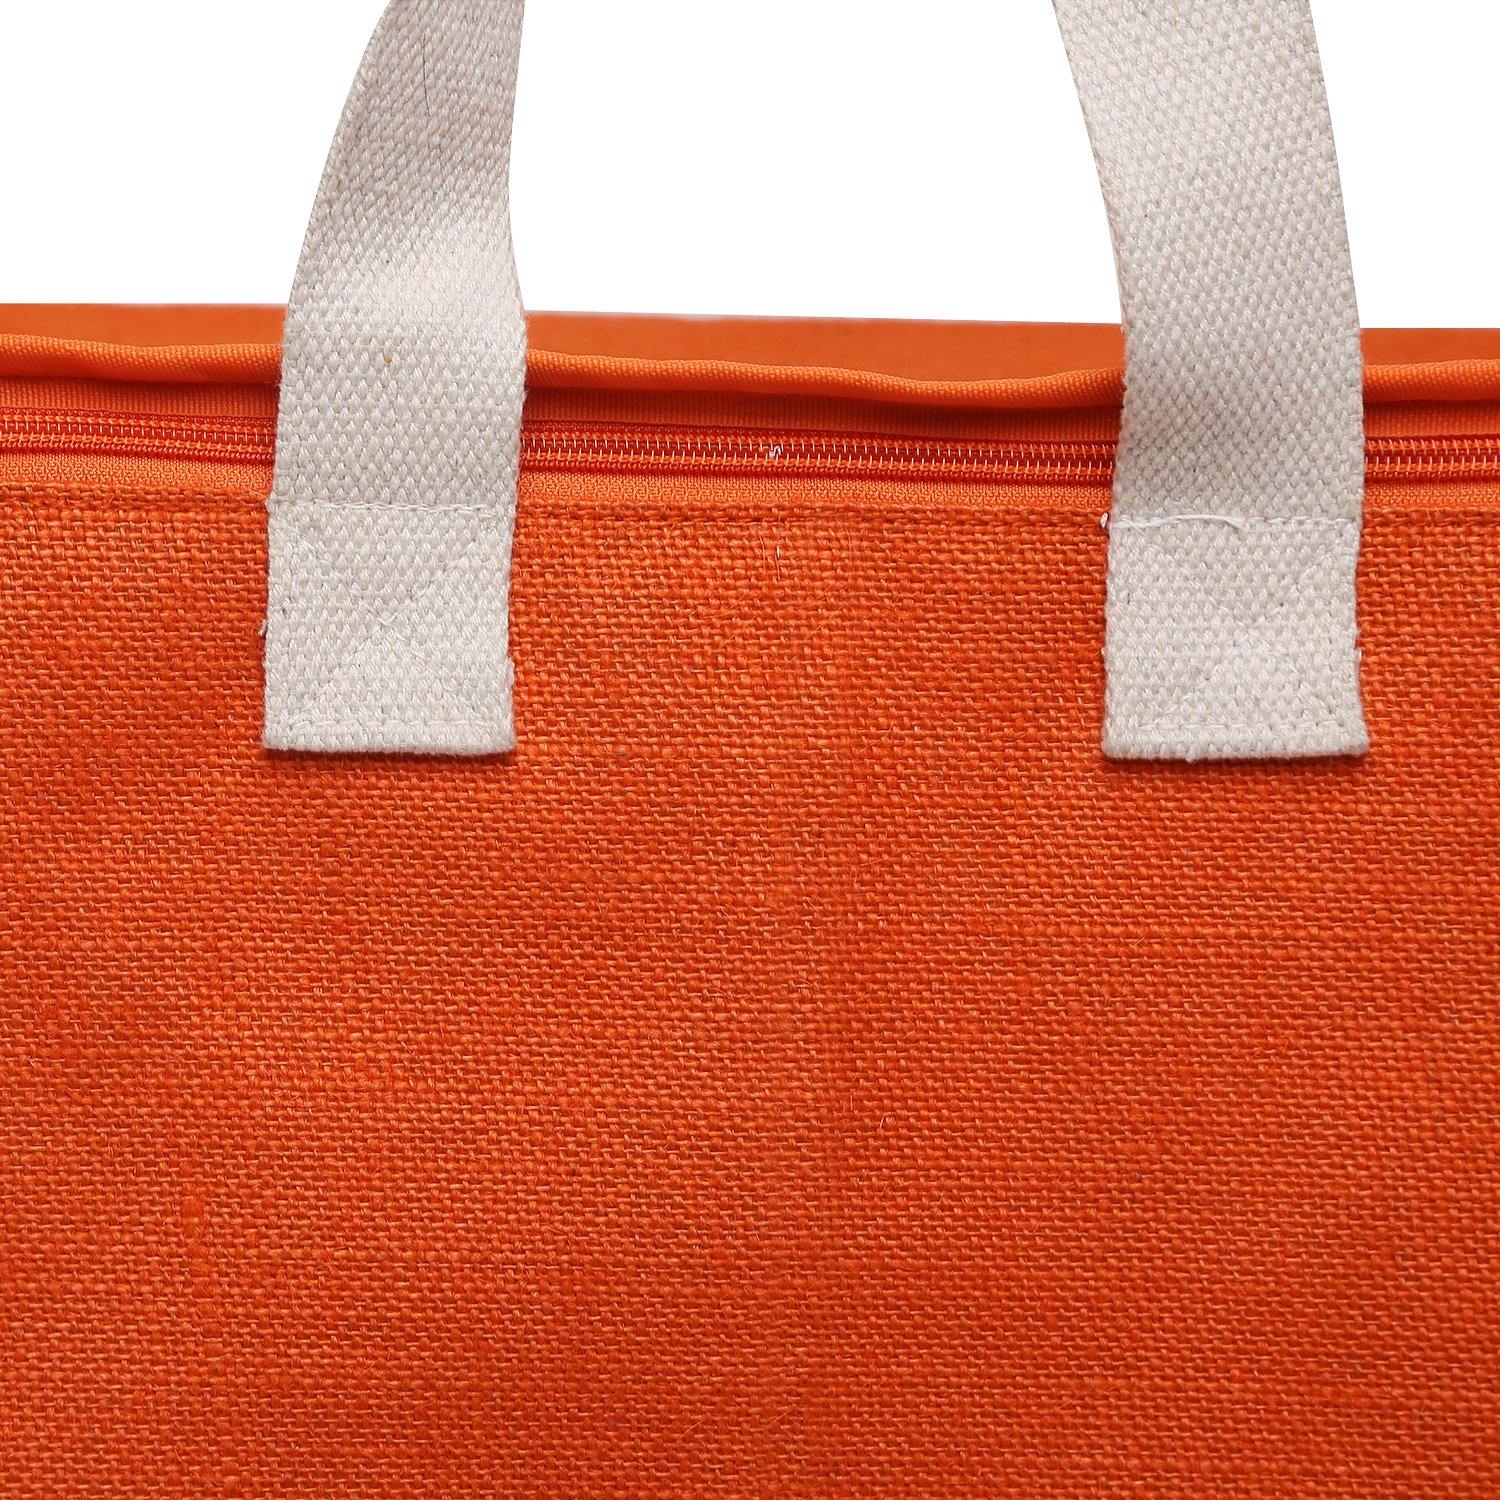 DOUBLE R BAGS Jute Shopping bags with Dual Zippers (Orange) - Double R Bags